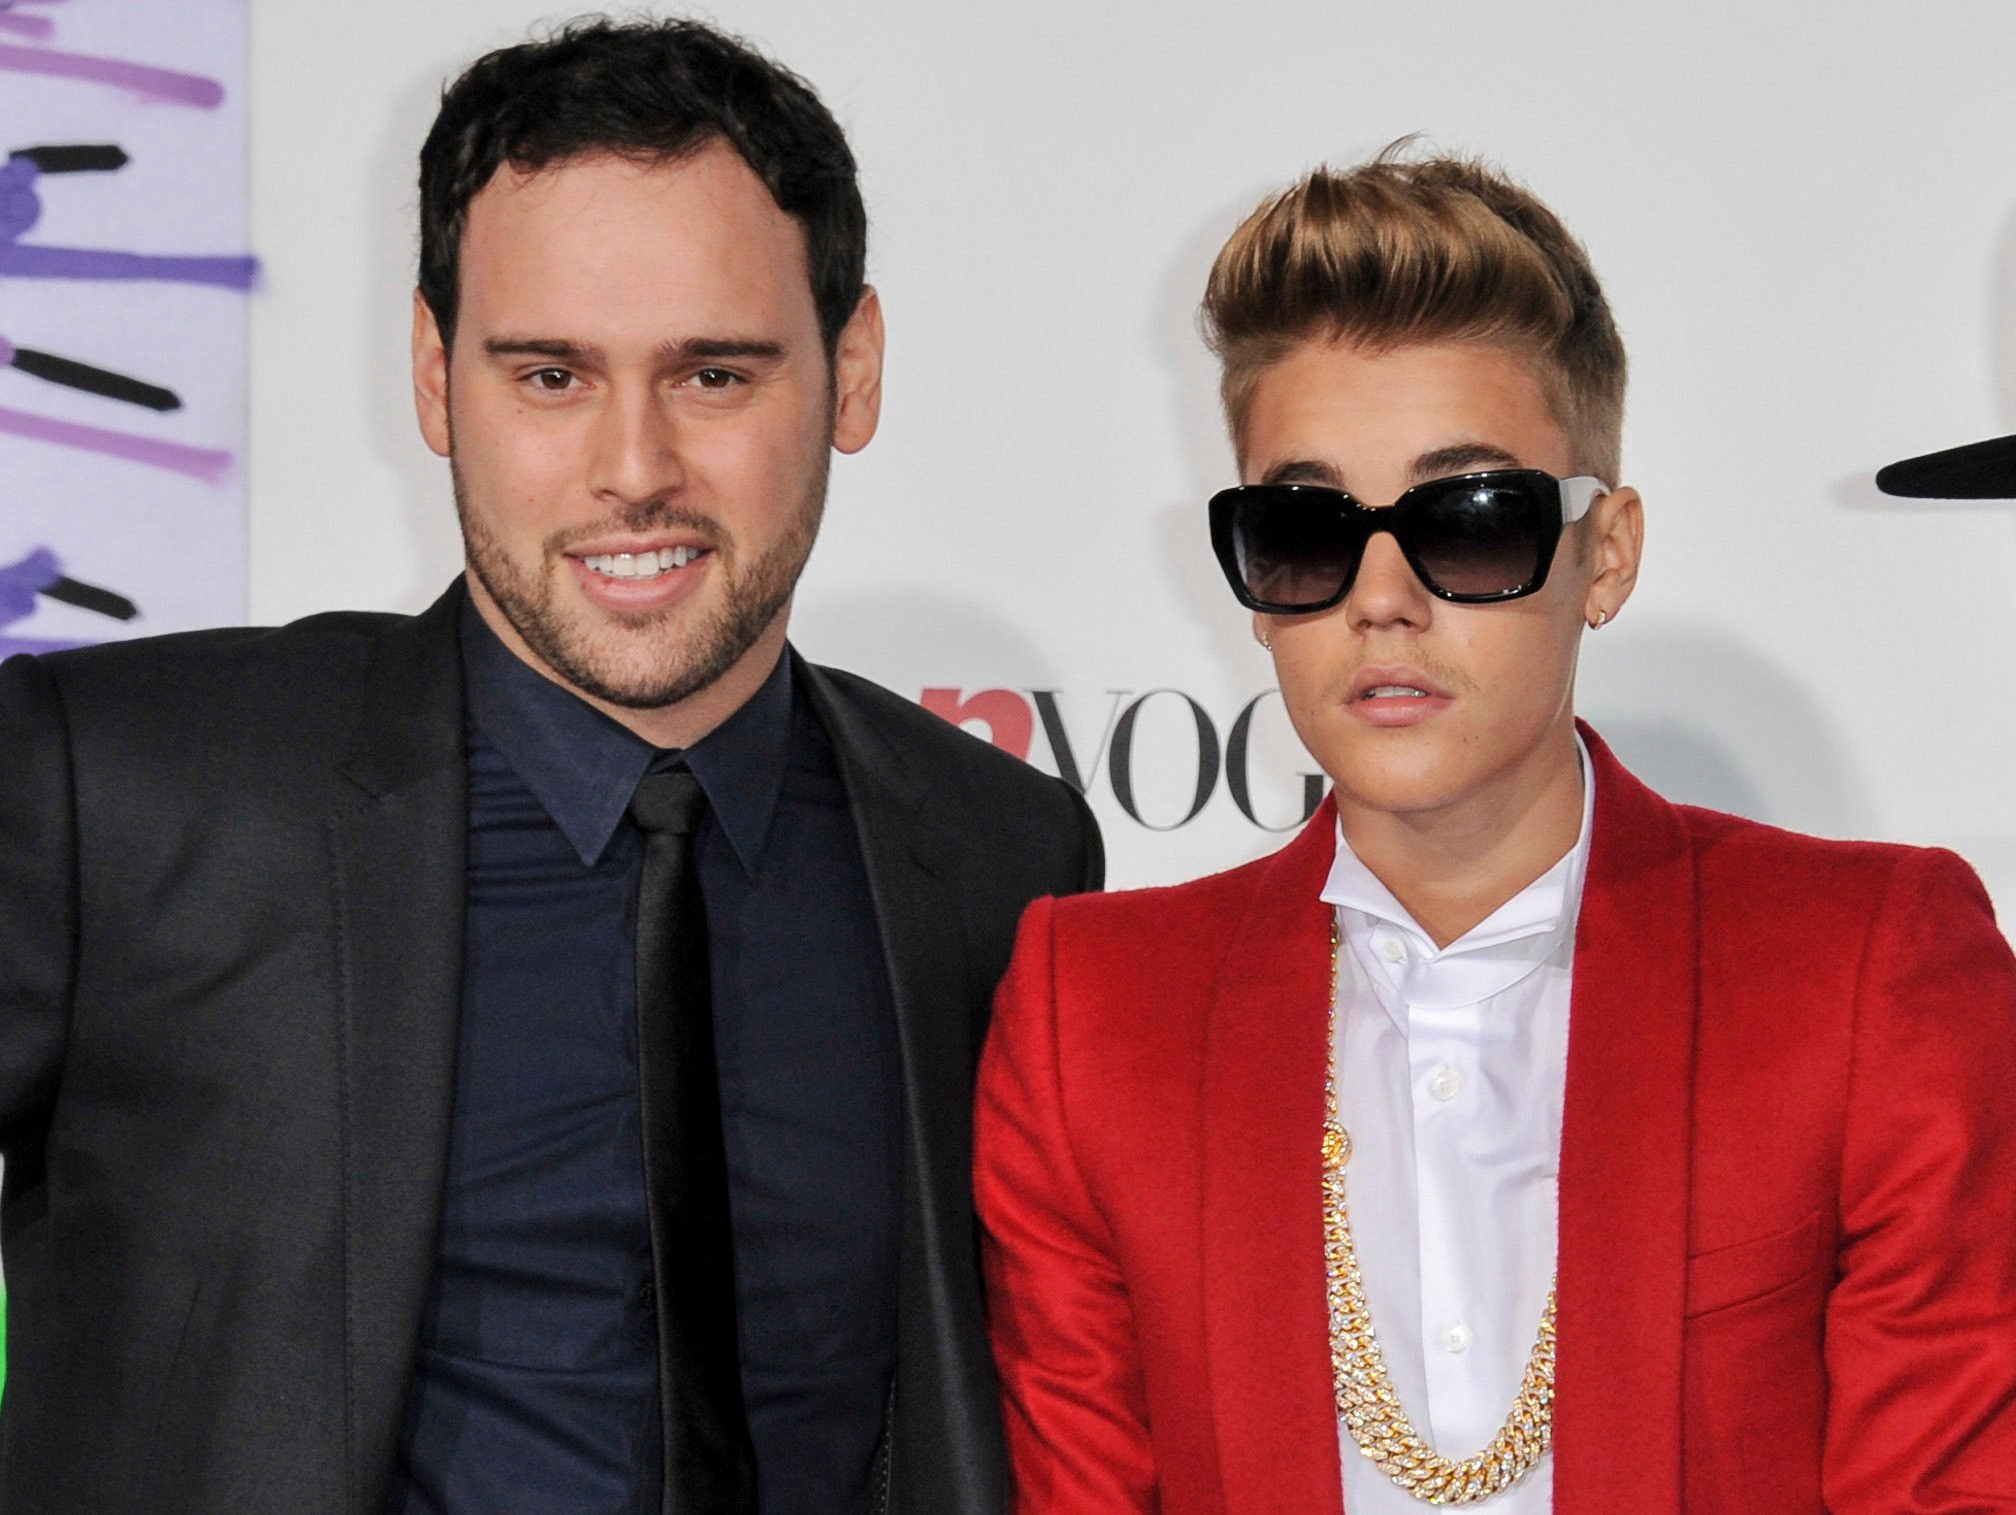 Music executive Scooter Braun, left, appears with Justin Bieber at the World Premiere of Justin Bieber’s Believe in Los Angeles, in December 2013. Photo: Invision/AP